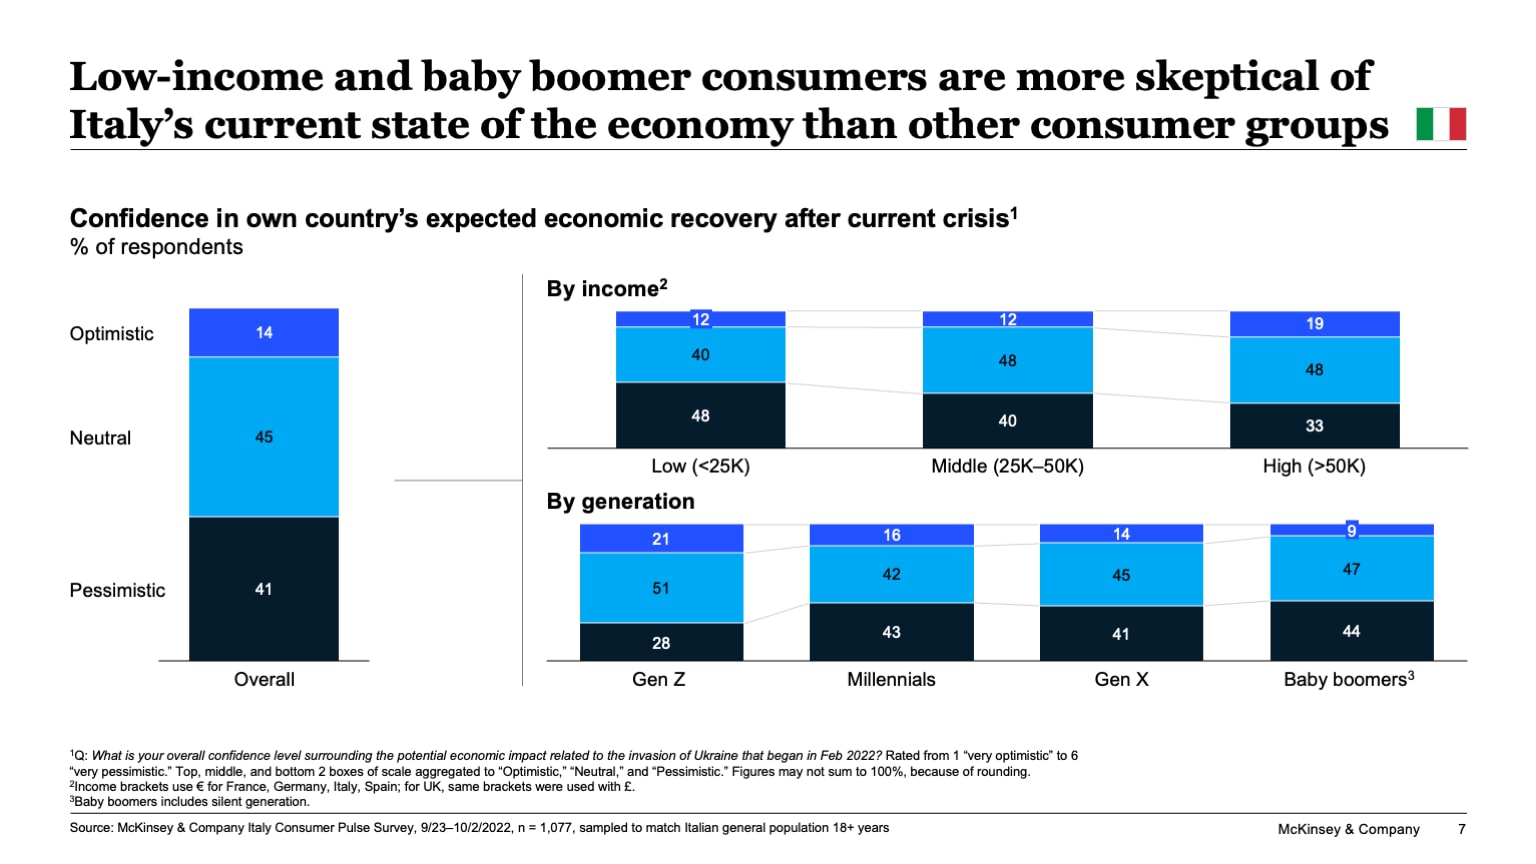 Low-income and baby boomer consumers are more skeptical of Italy’s current state of the economy than other consumer groups